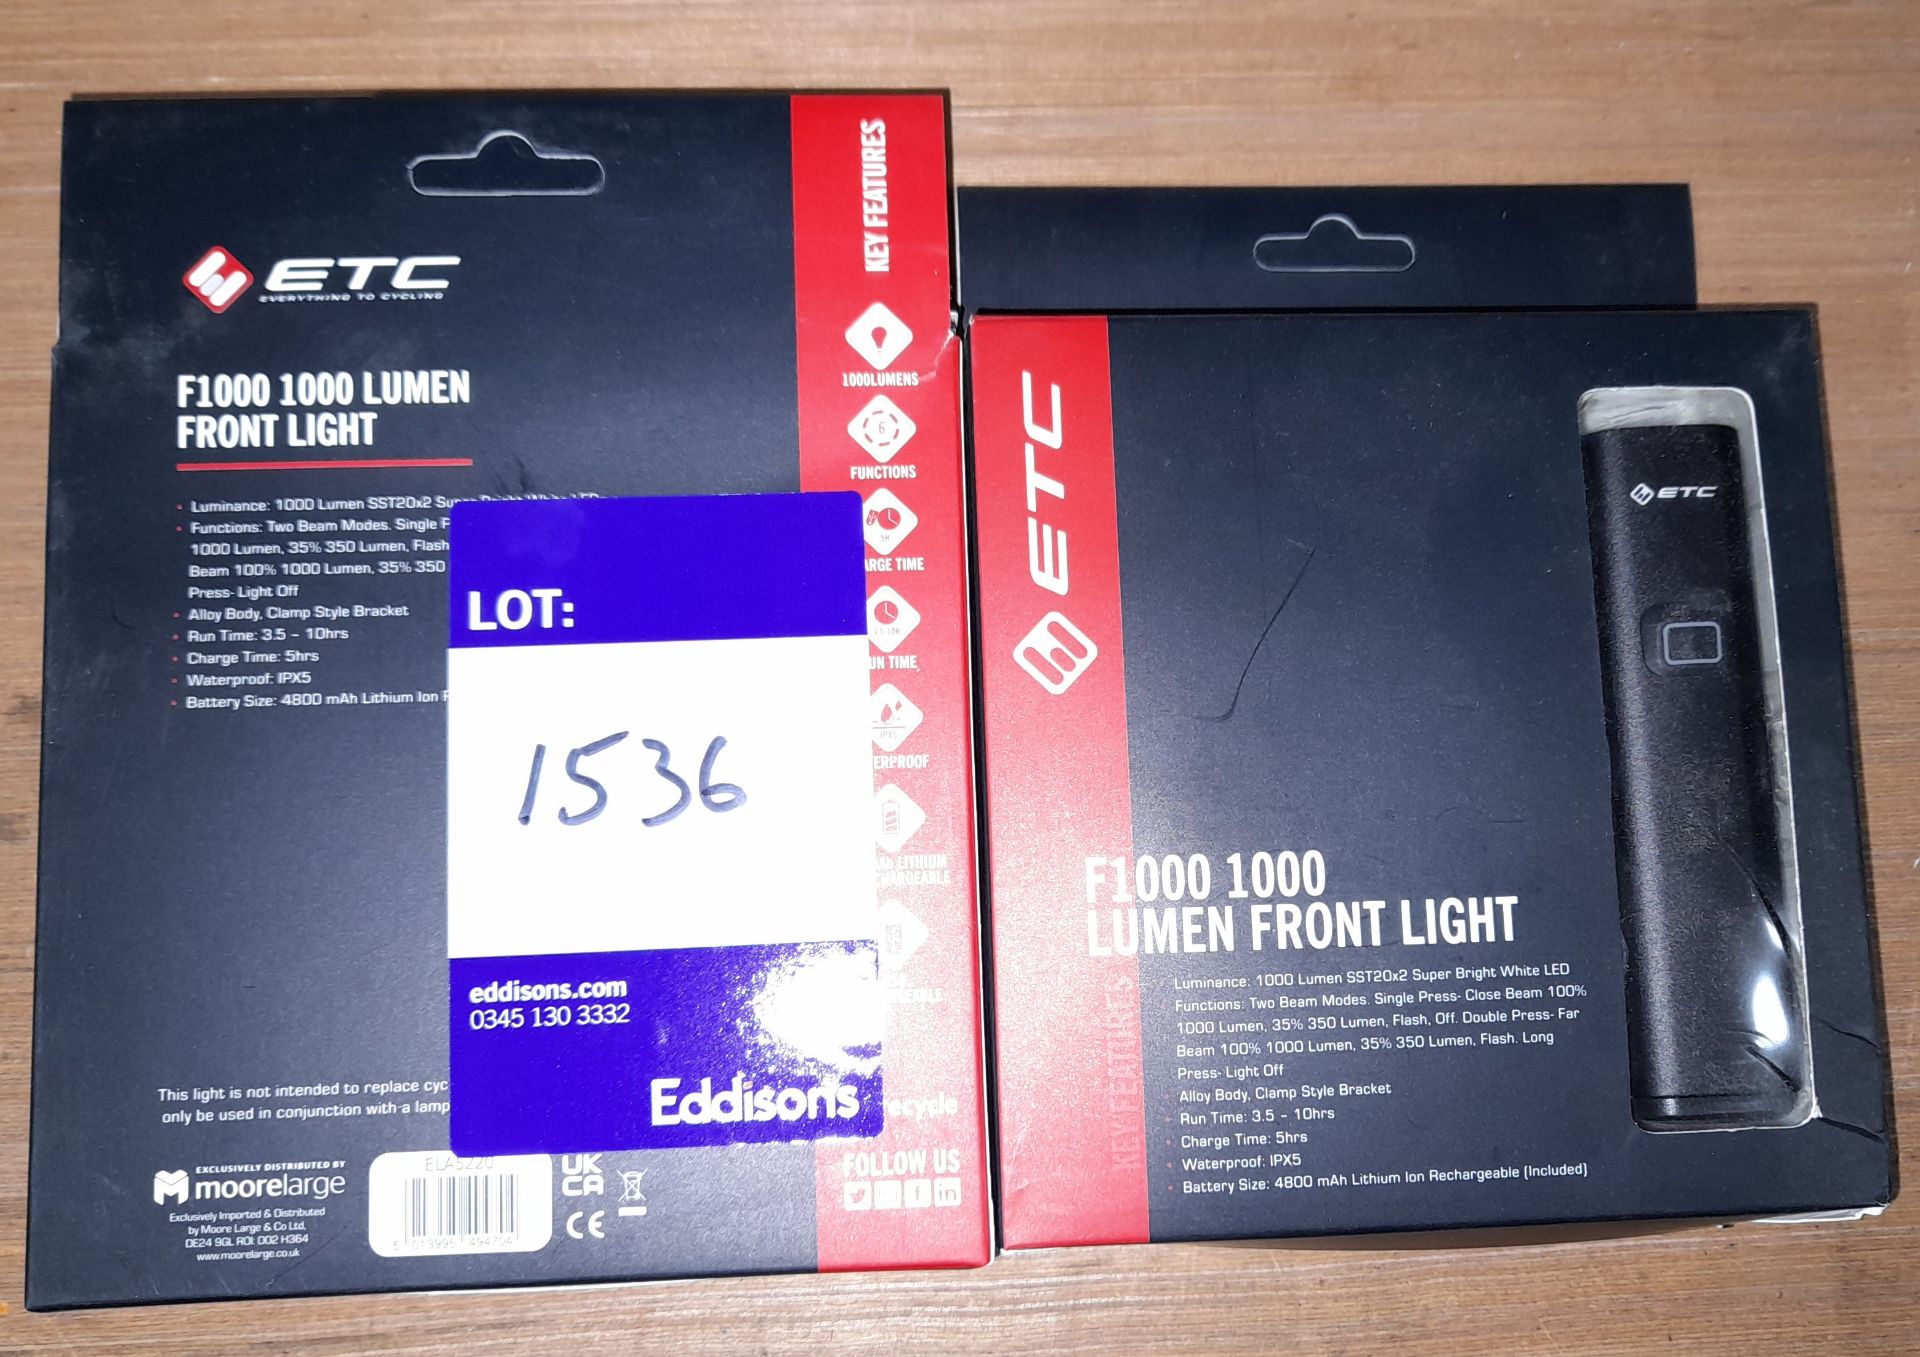 2 x ETC F1000 1000 Lumen Front Light (This lot forms part of composite lot 1621 and at the end of - Image 2 of 2